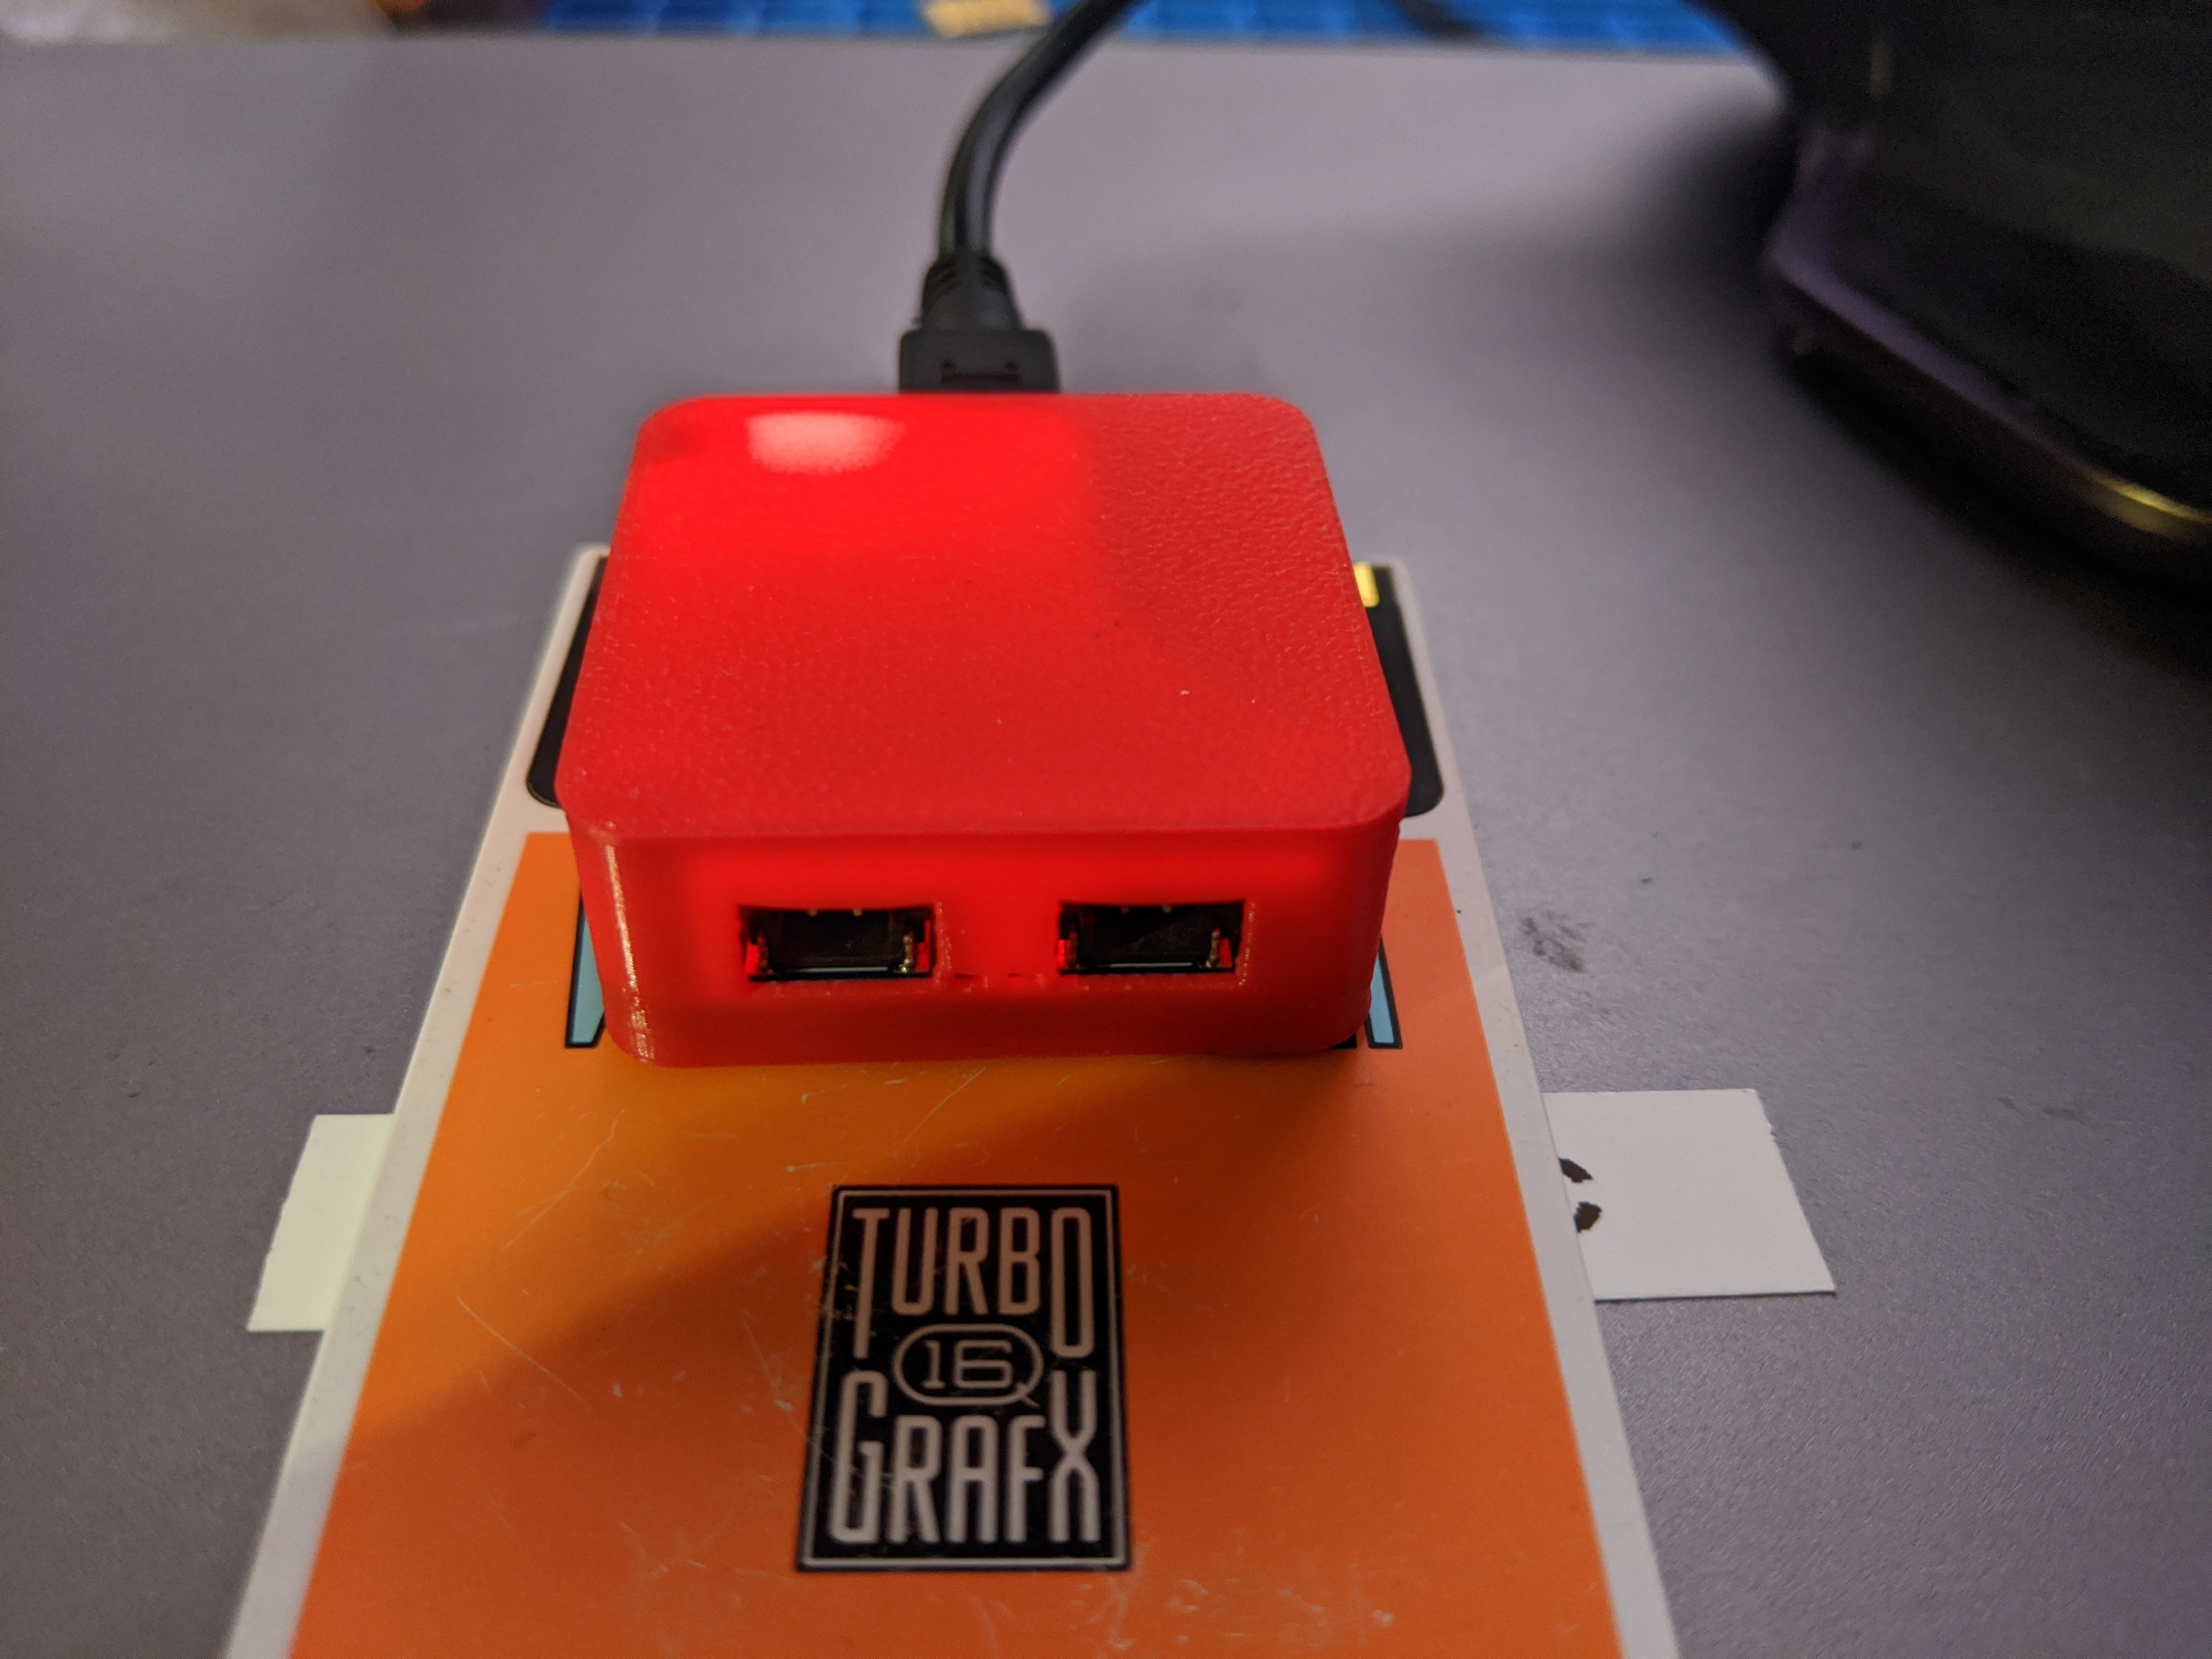 Printed case for Adafruit USB LiIon/LiPoly charger - v1.2